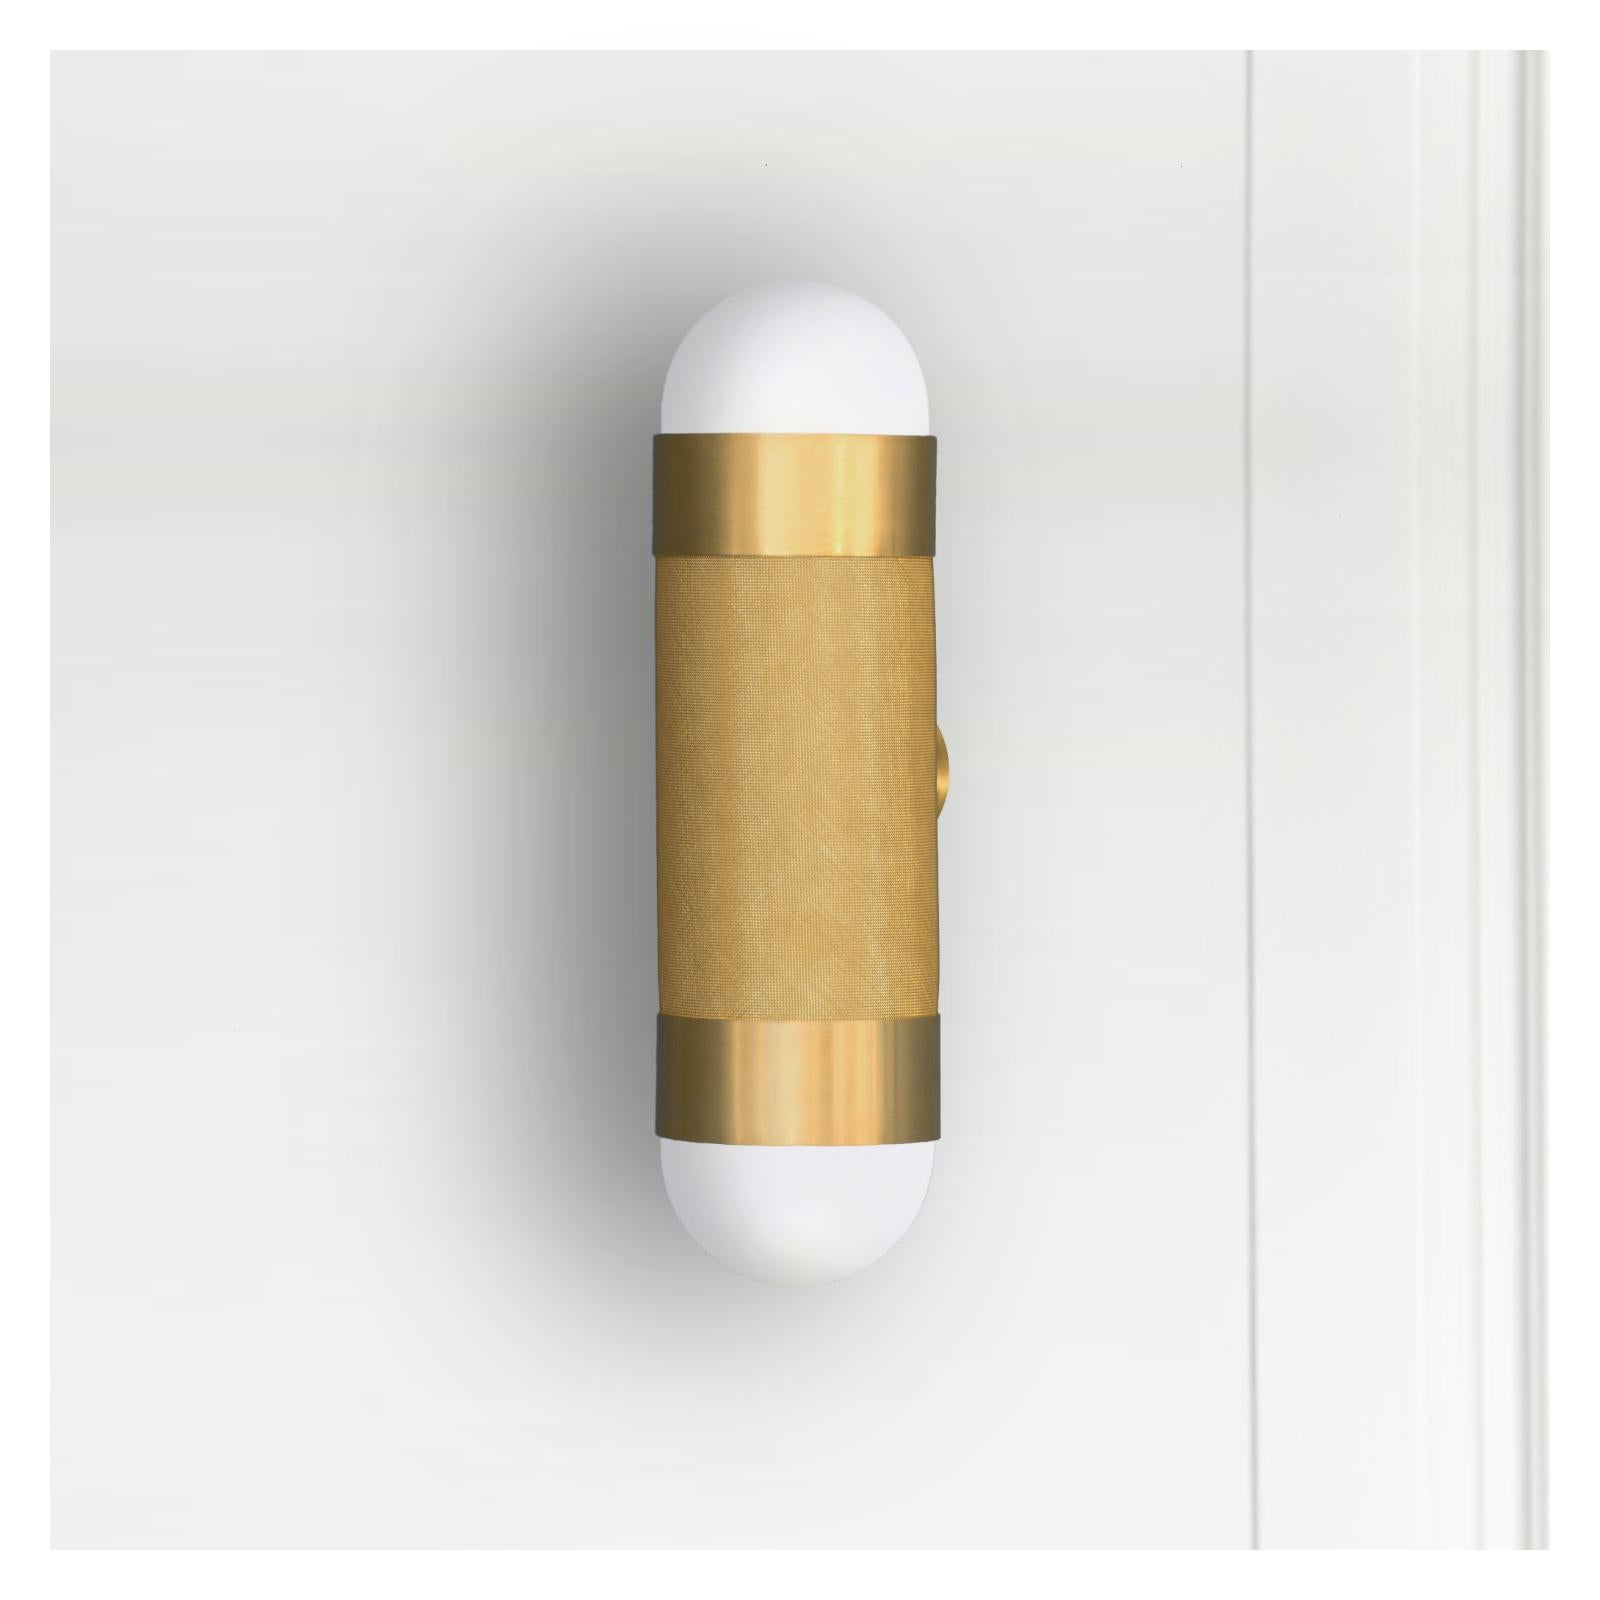 The Loom wall light is defined by its signature woven brass cylinder topped with hand-brushed brass sleeves and completed with soft-white borosilicate glass domes. When illuminated the LOOM emanates a soft, warm glow through the brass weave,